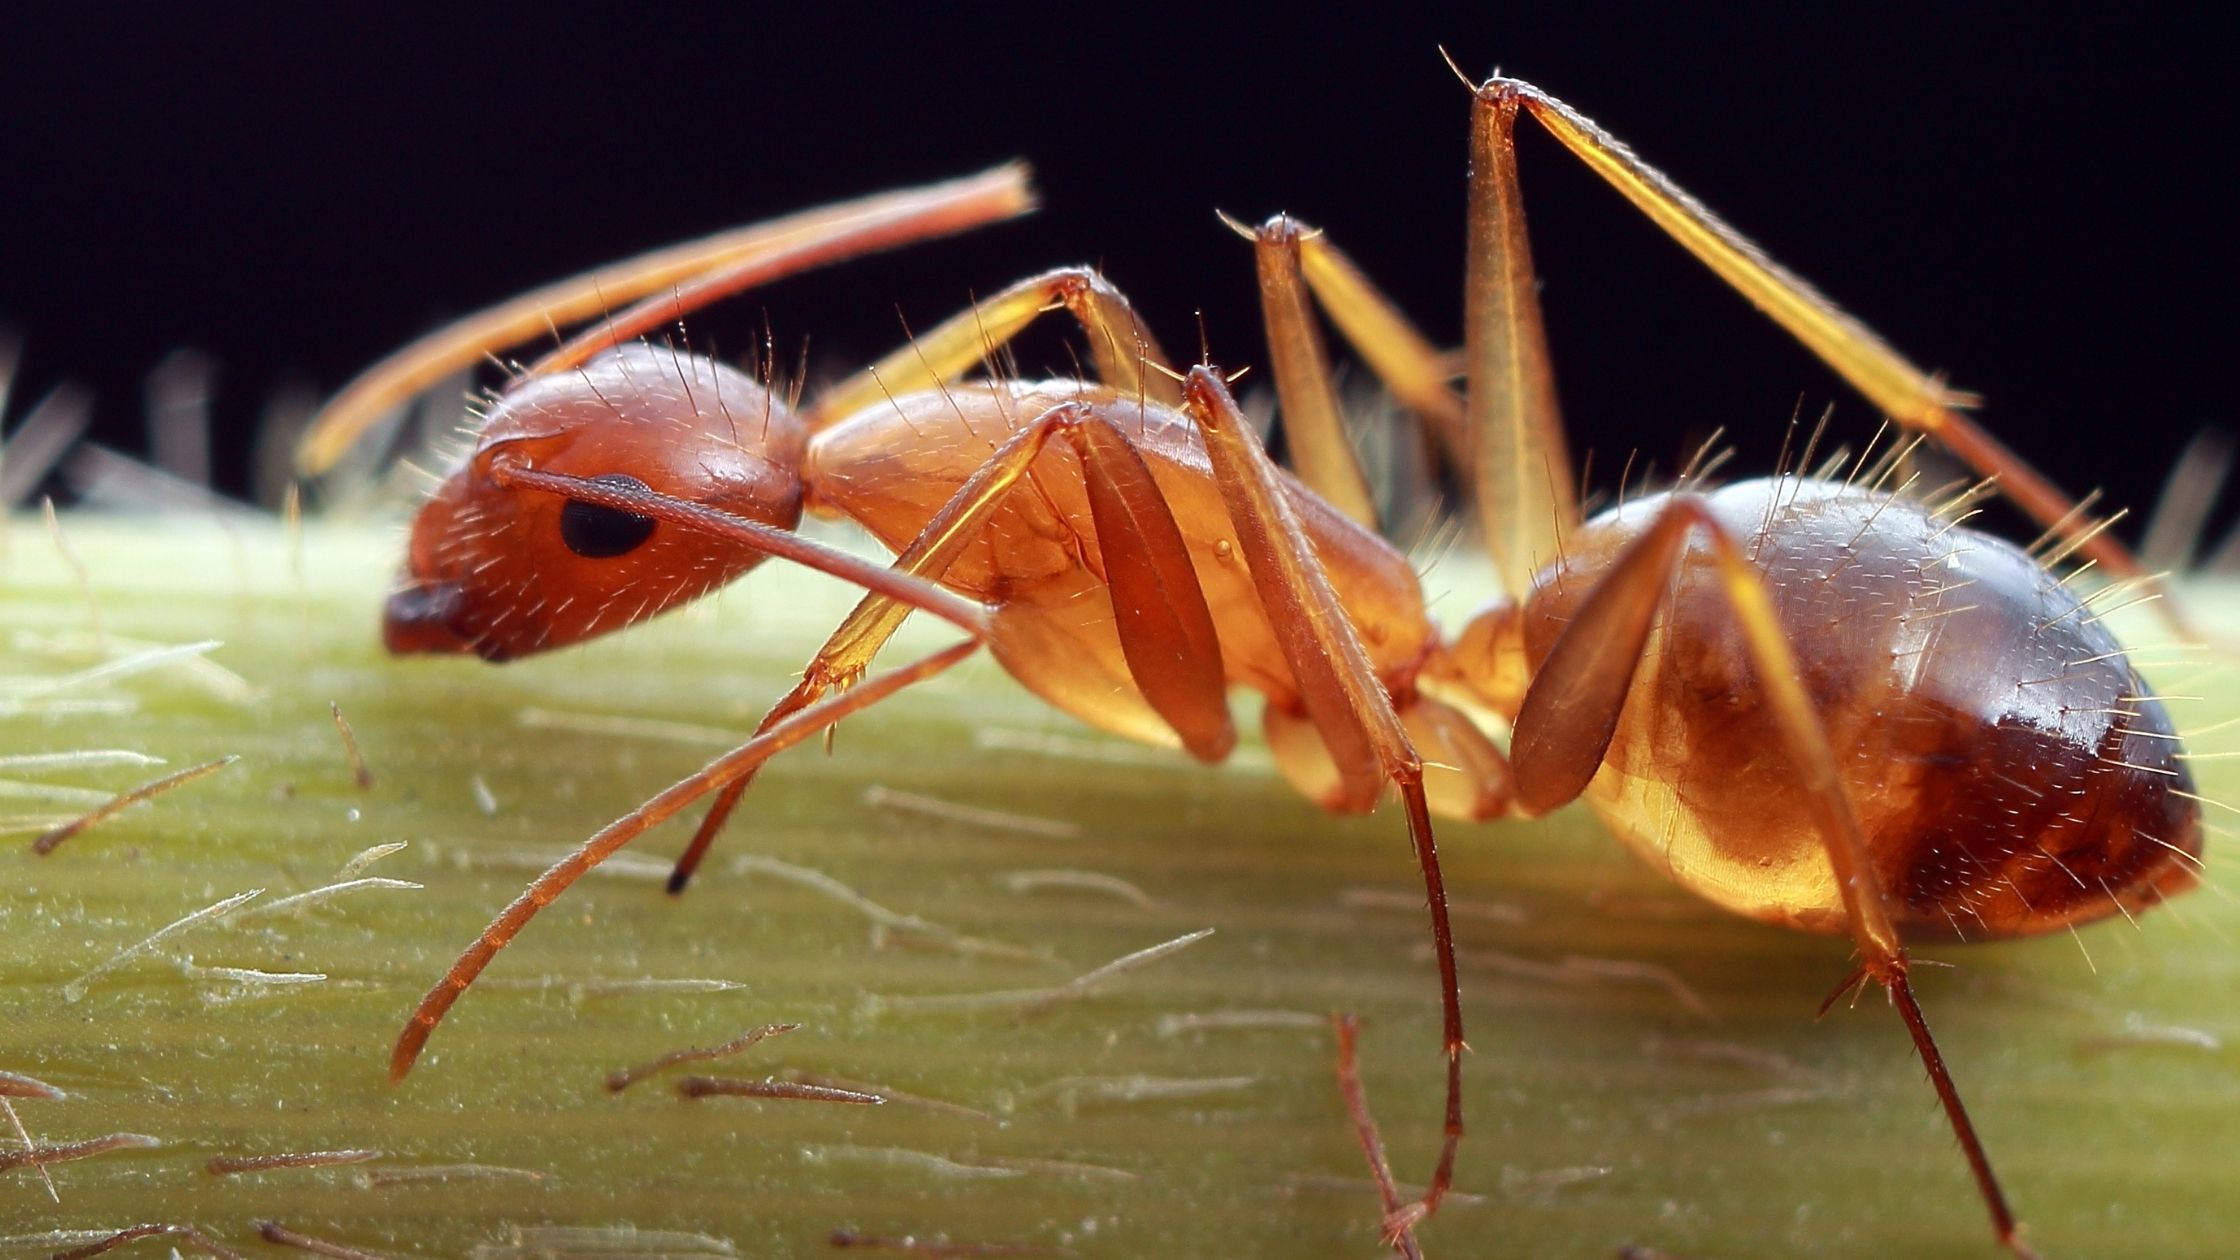 Ants: What You Need to Know